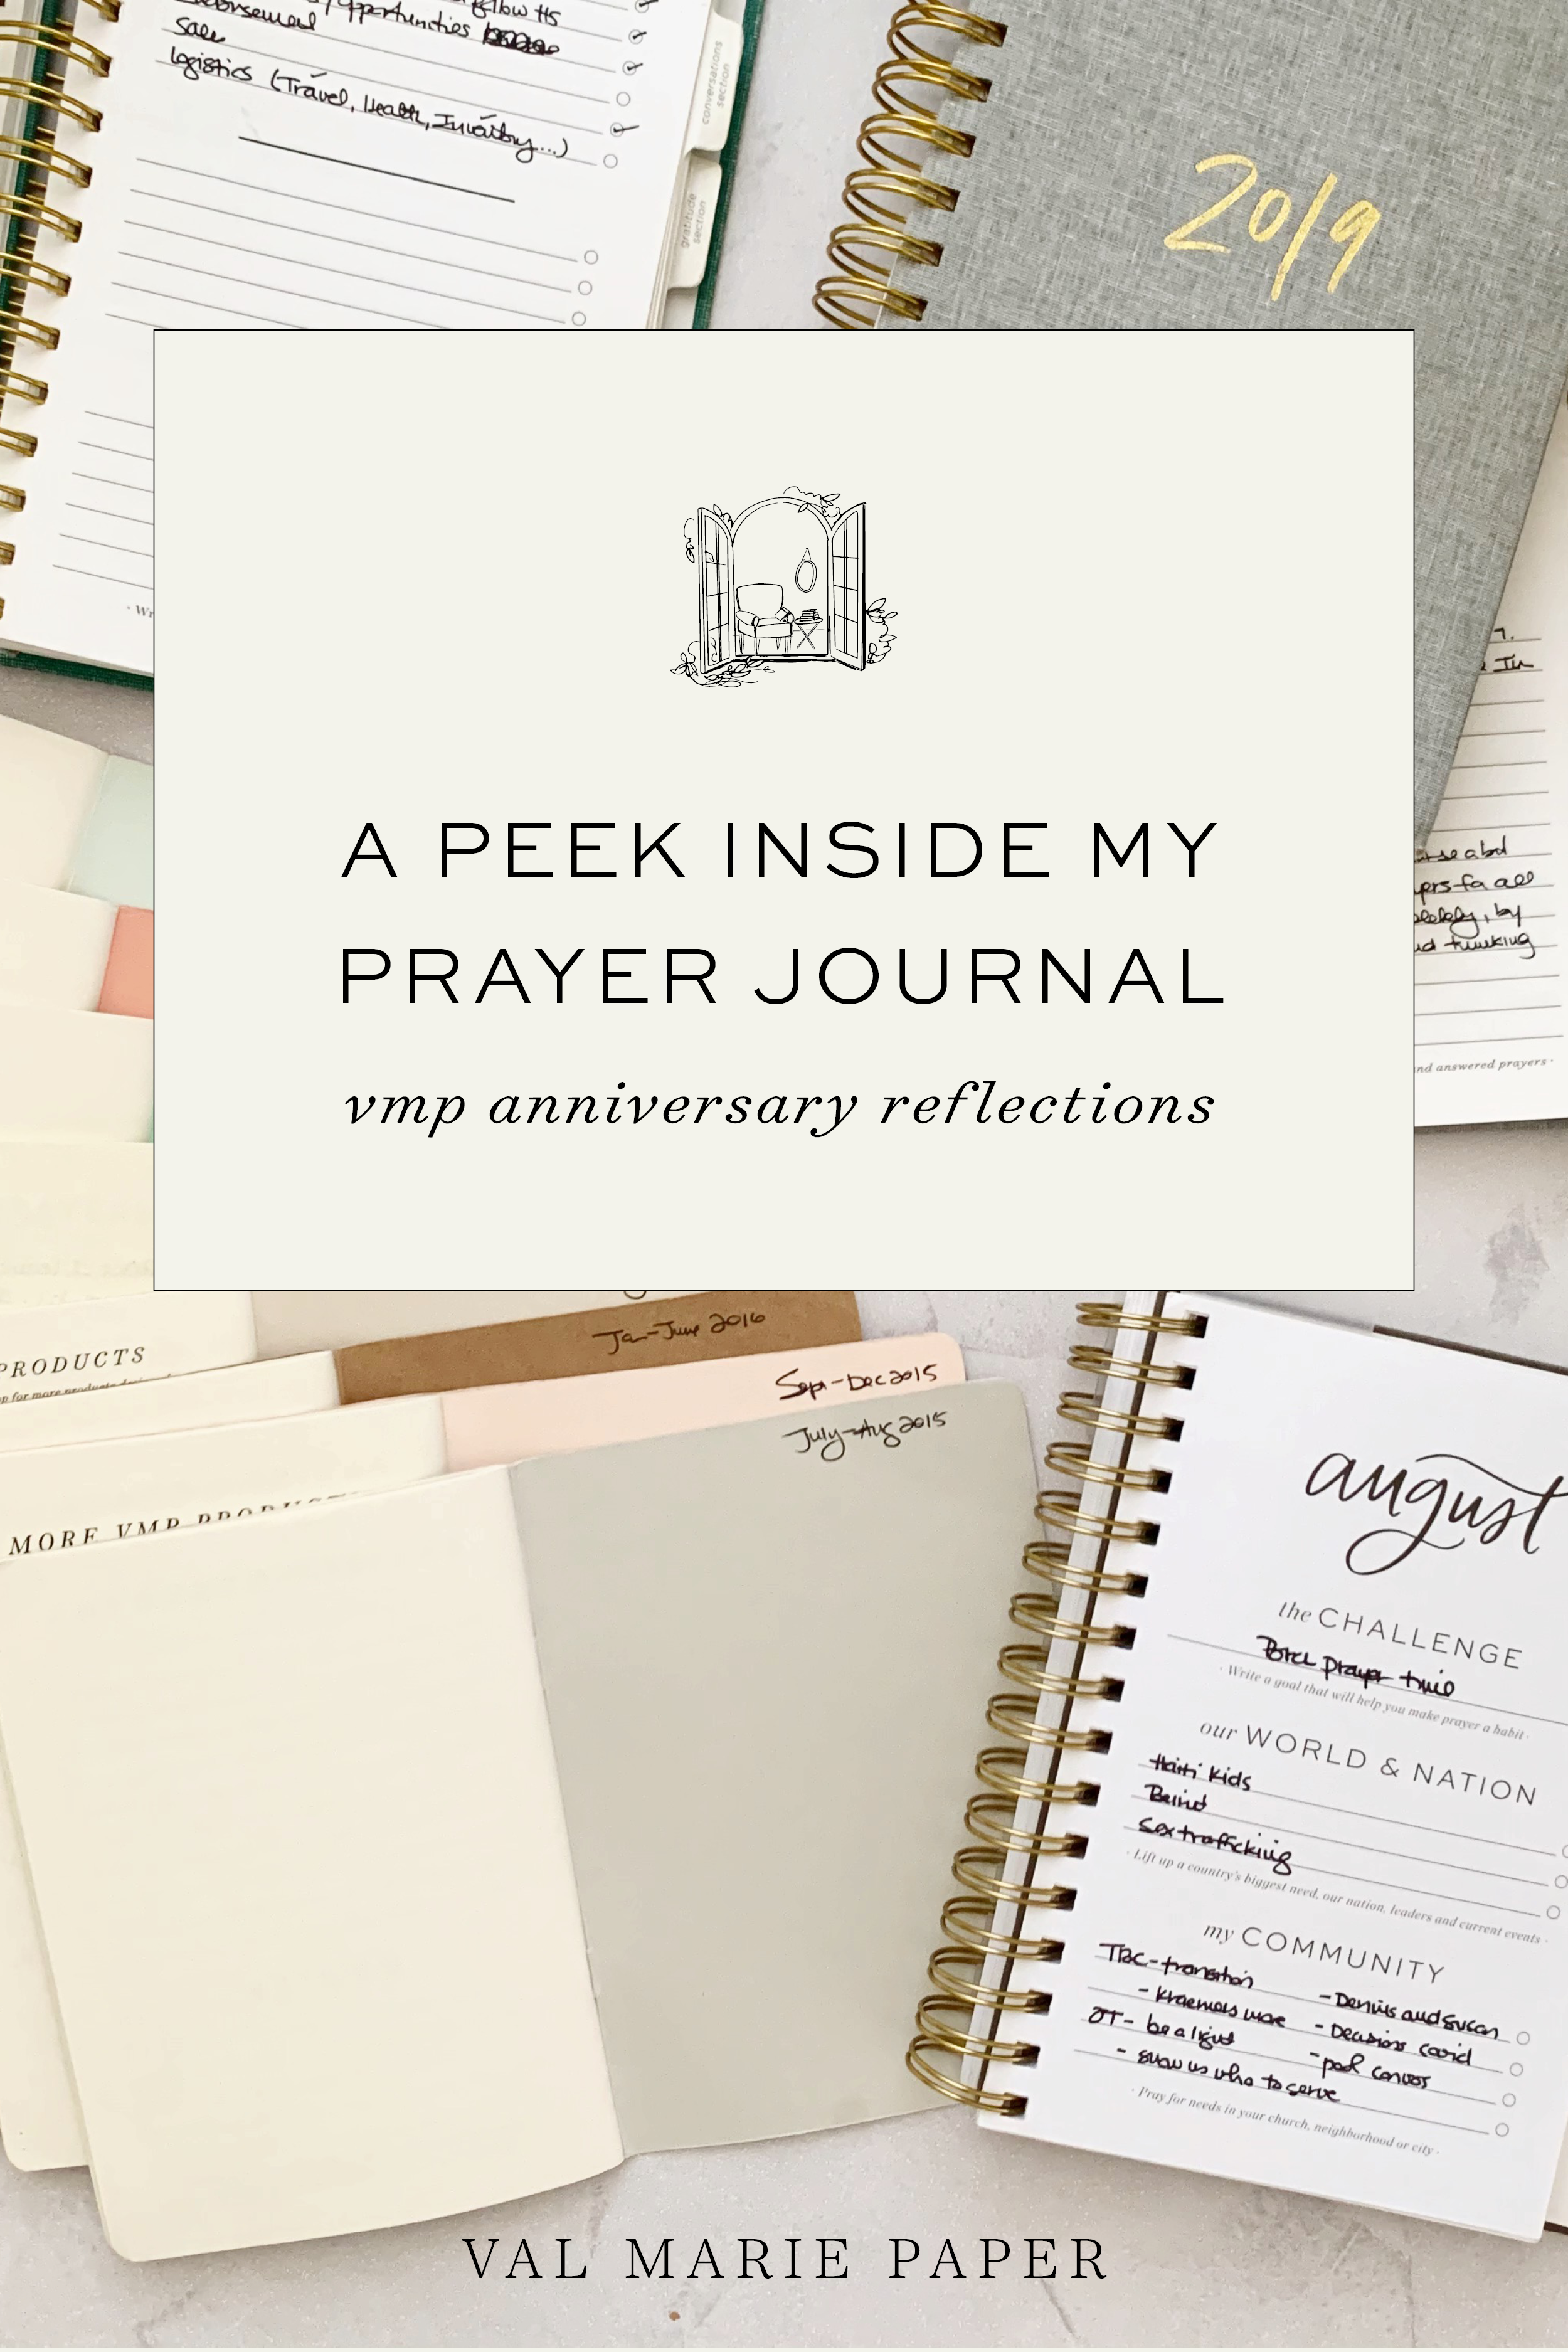 Our Anniversary by Valerie Woerner, prayer journal, women's ministry, prayer, refresh, meditation, how to make a prayer journal, praying for your kids, husband, prayer warrior, war room, Bible study, how to, DIY, notebook, spiral, tools, prayer notebook, how to pray, entrepreneur